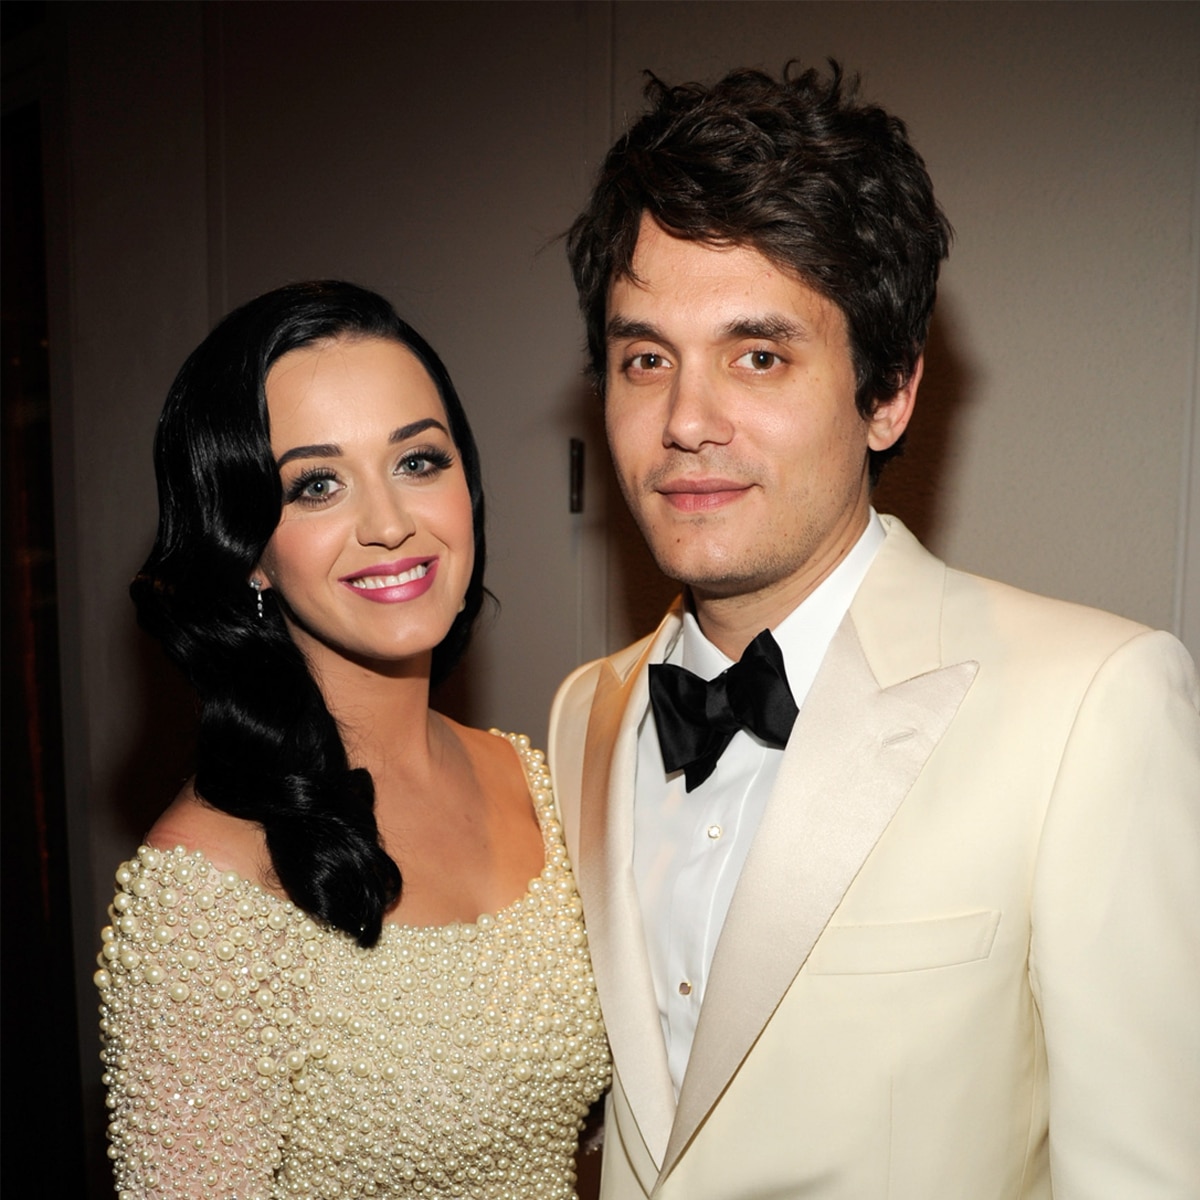 How John Mayer Feels About His Song With Katy Perry Years After Split